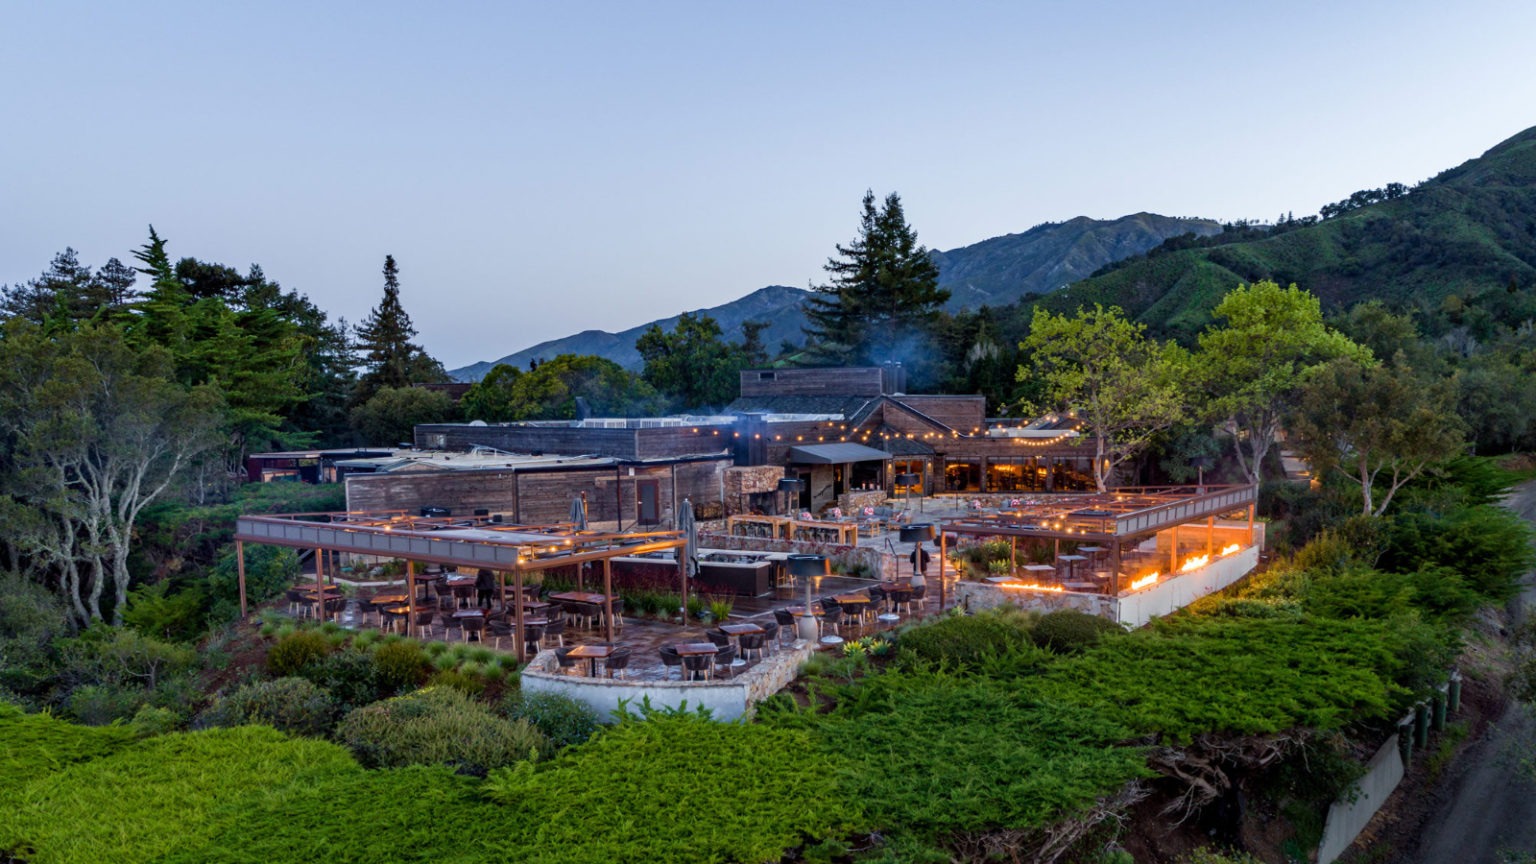 Aerial view of the Ventana Big Sur lodge, a luxurious hotel in Big Sur, California